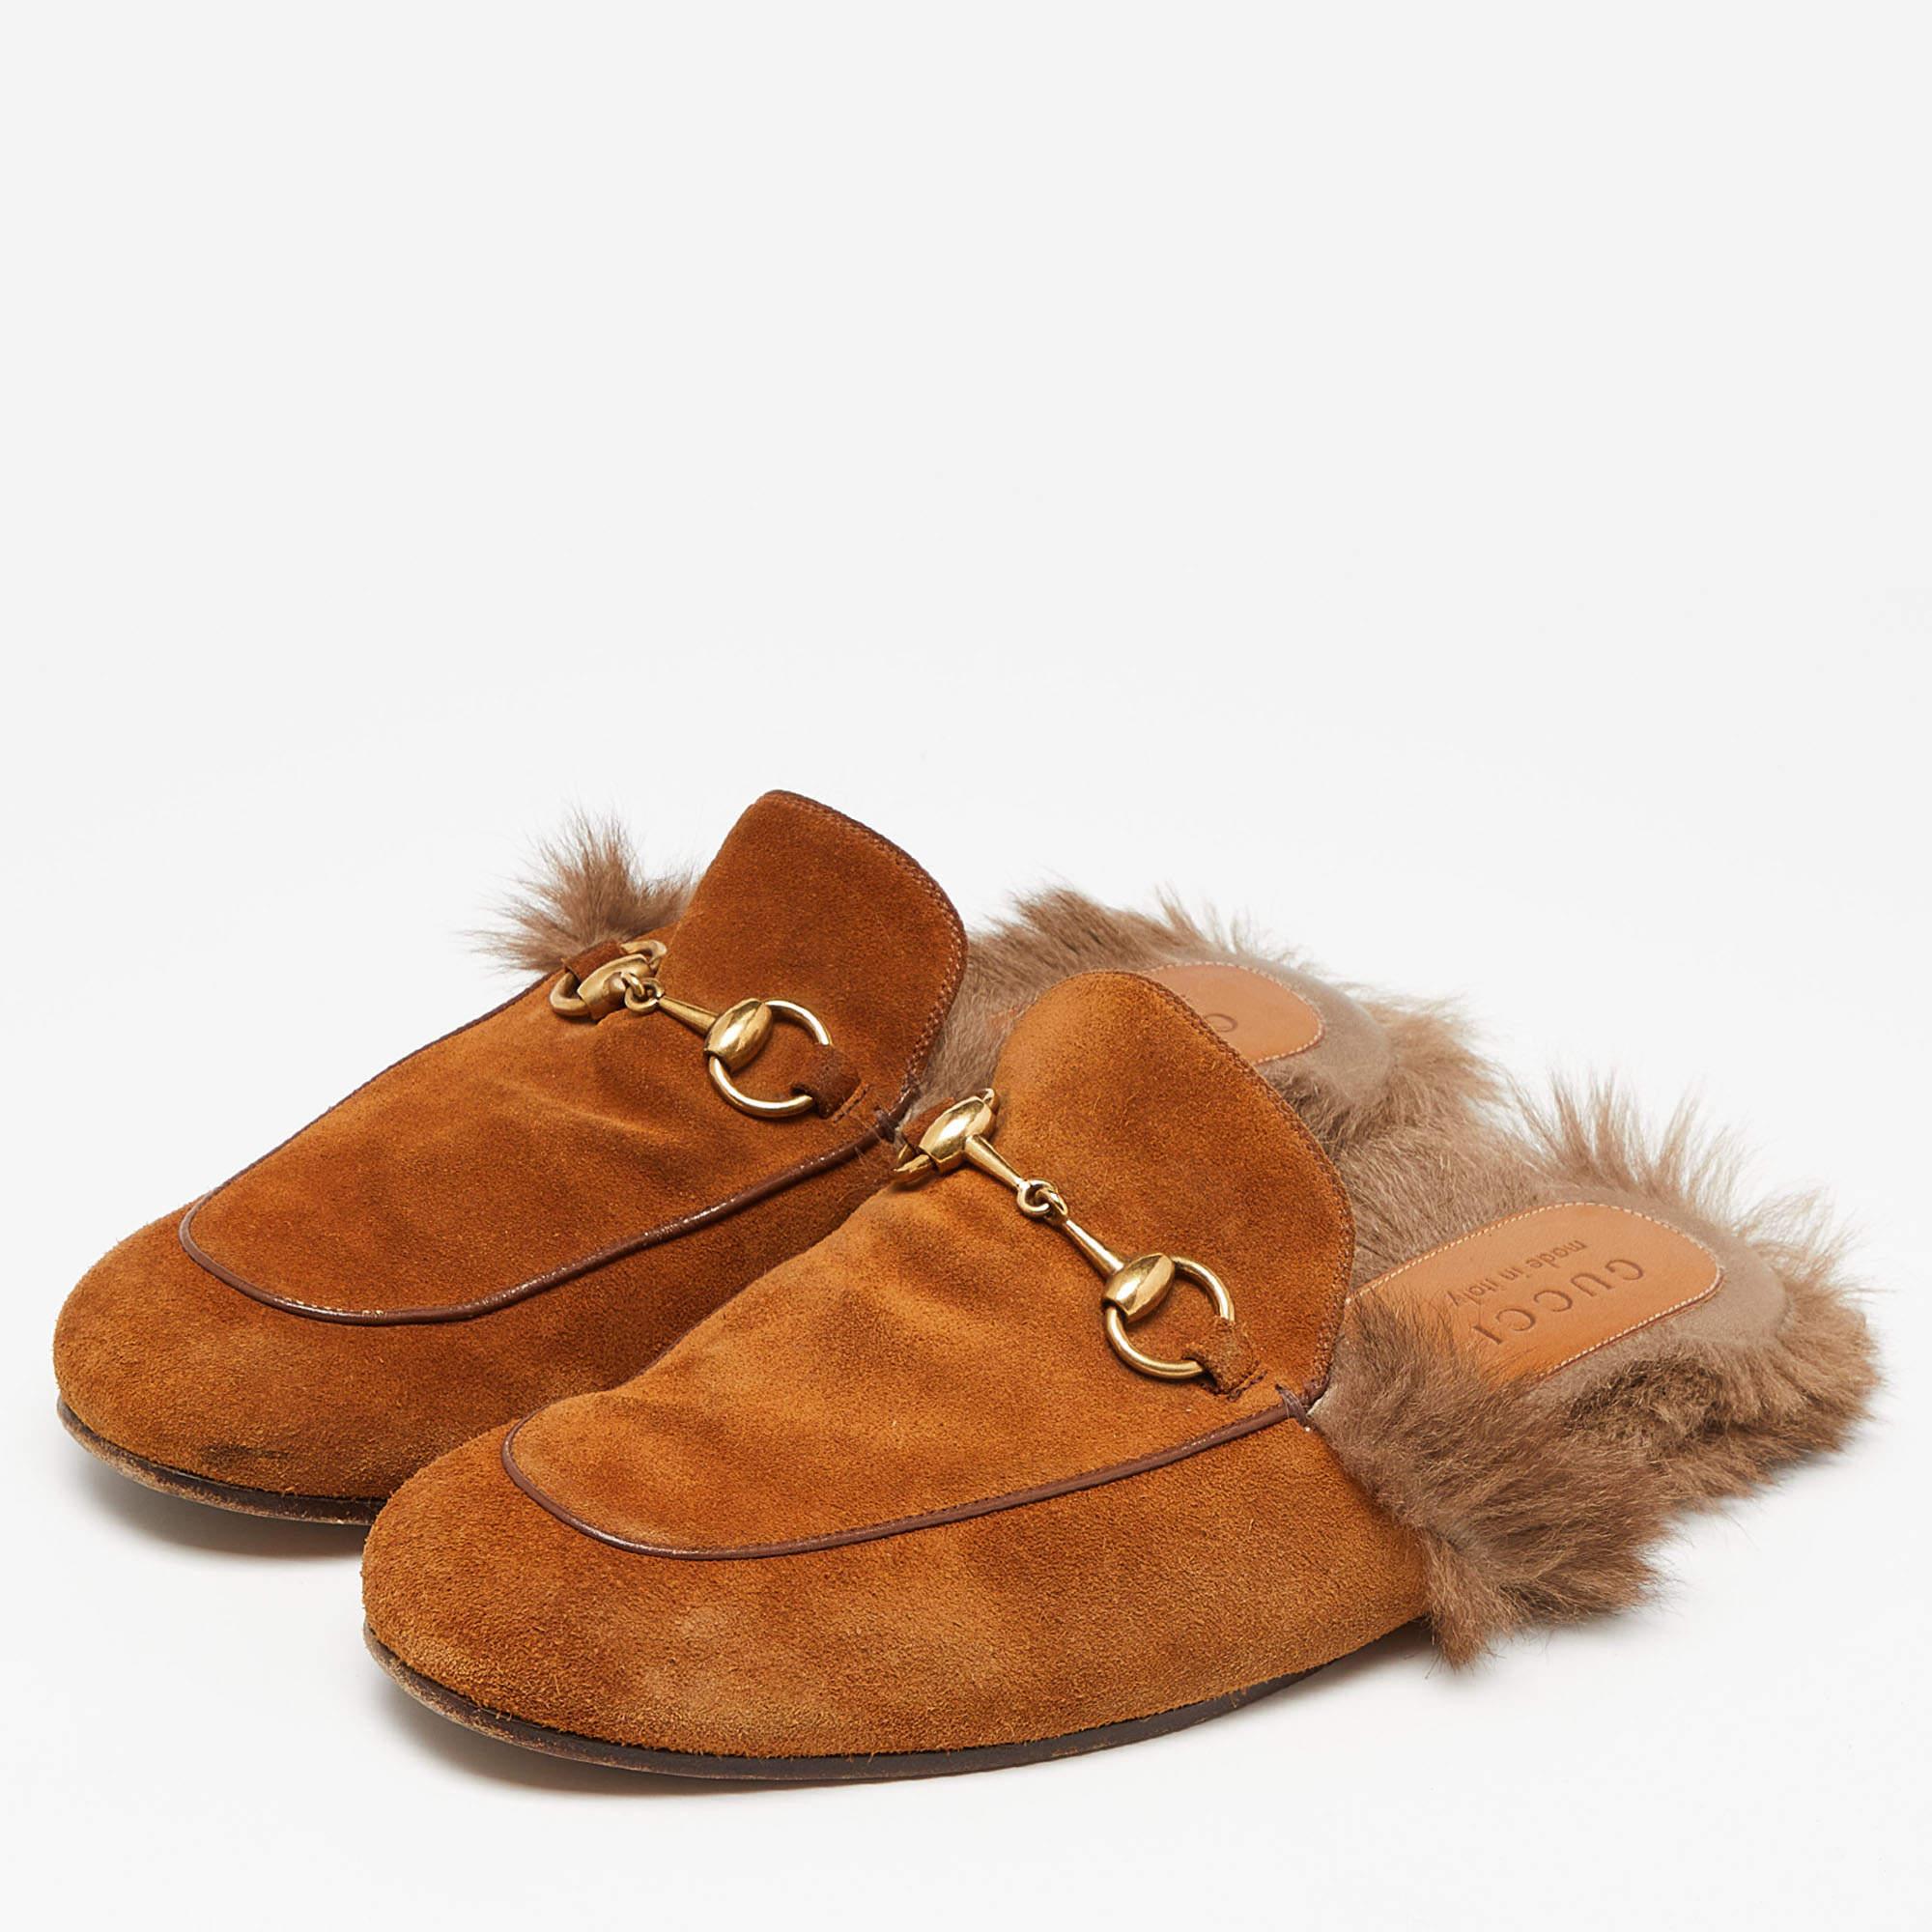 Gucci Brown Suede and Fur Lined Princetown Flat Mules Size 42 In Good Condition For Sale In Dubai, Al Qouz 2